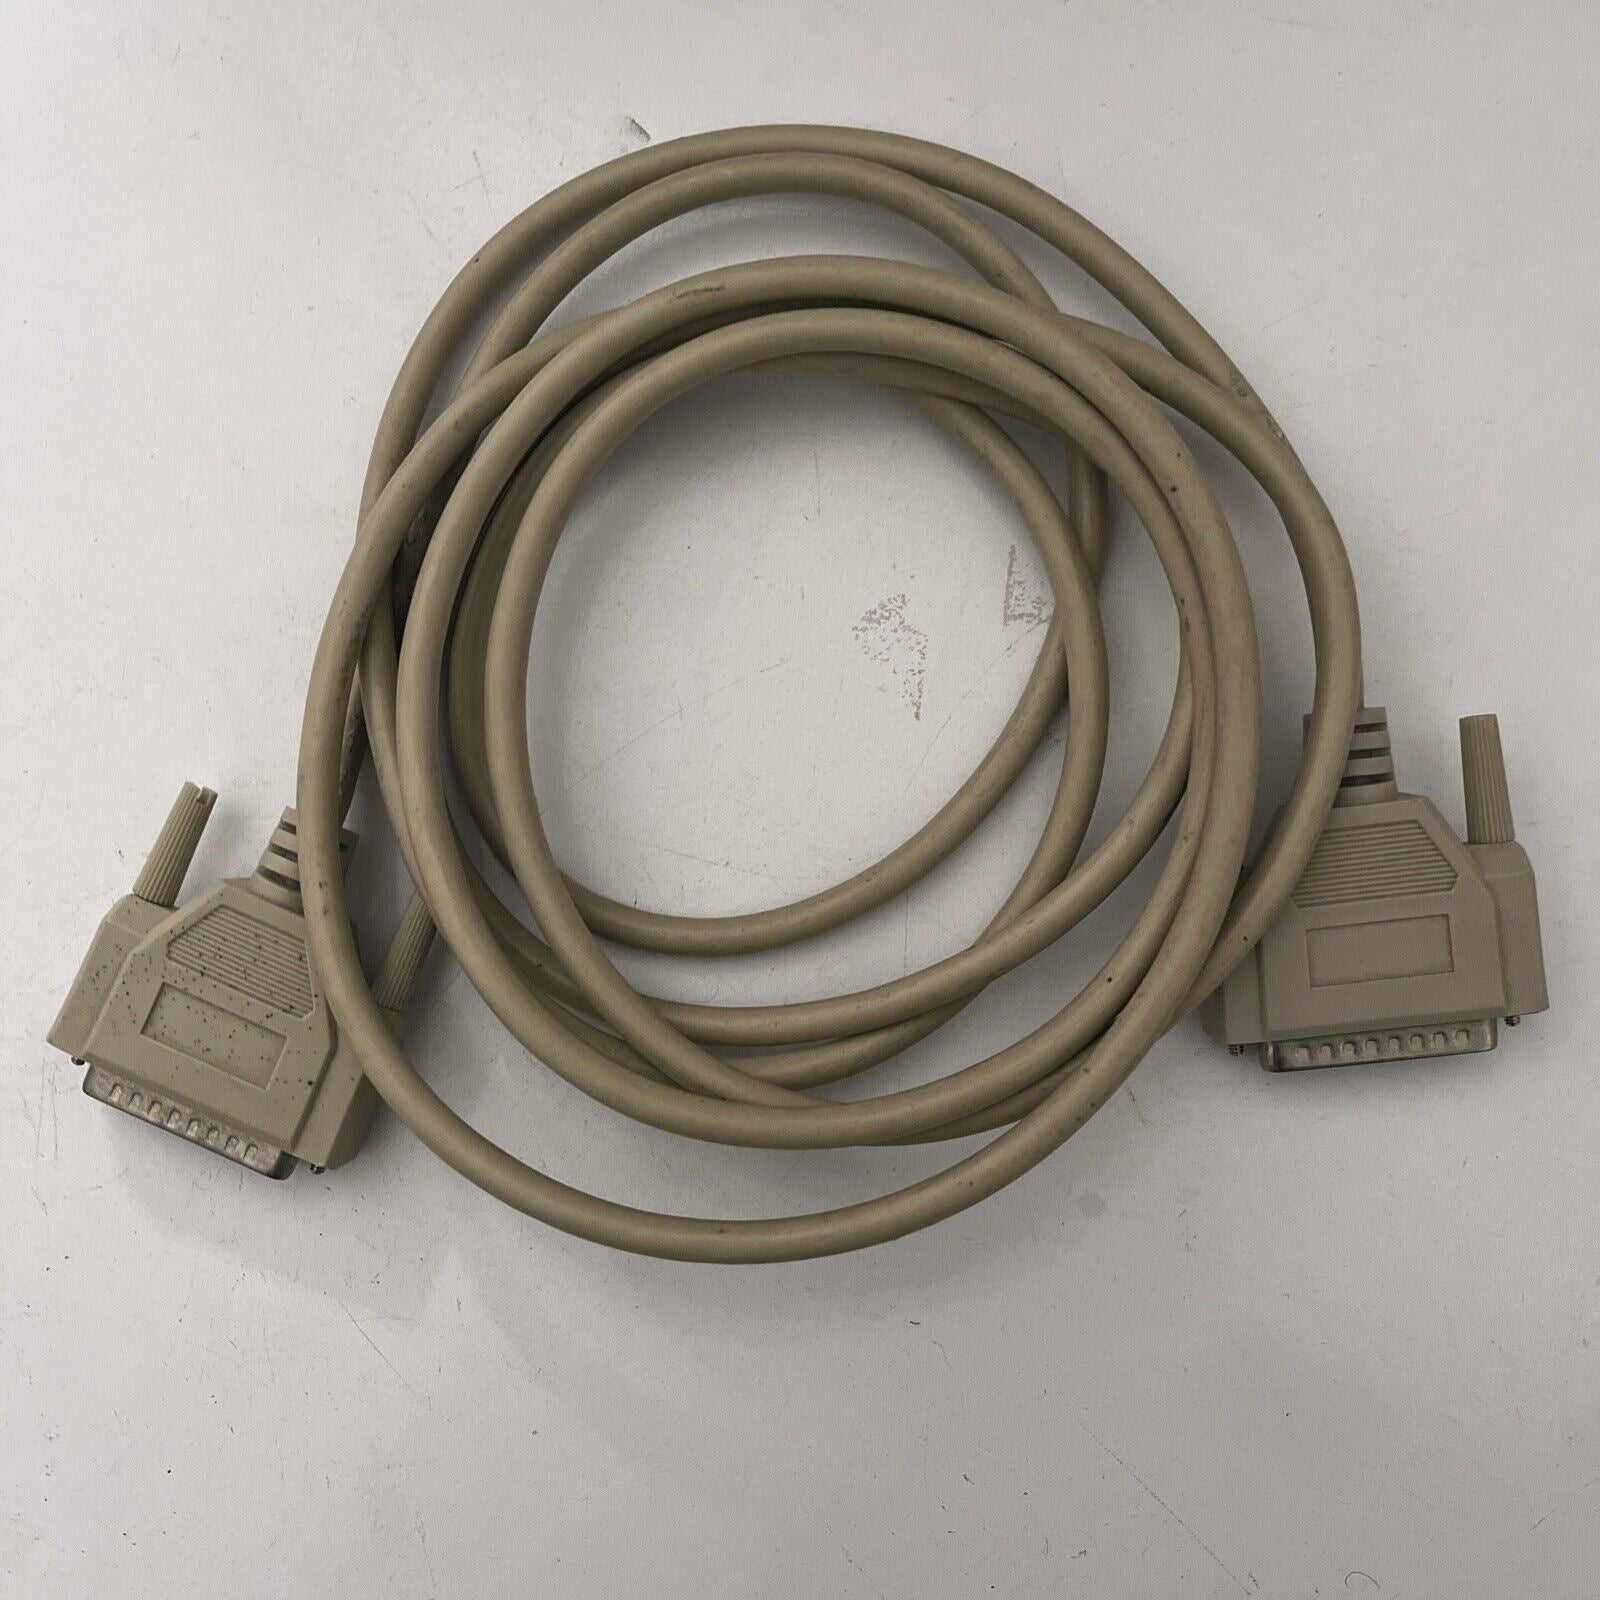 Parallel Cable 3 metre LPT1 IEEE 1284 Male to Male – Retro Unit